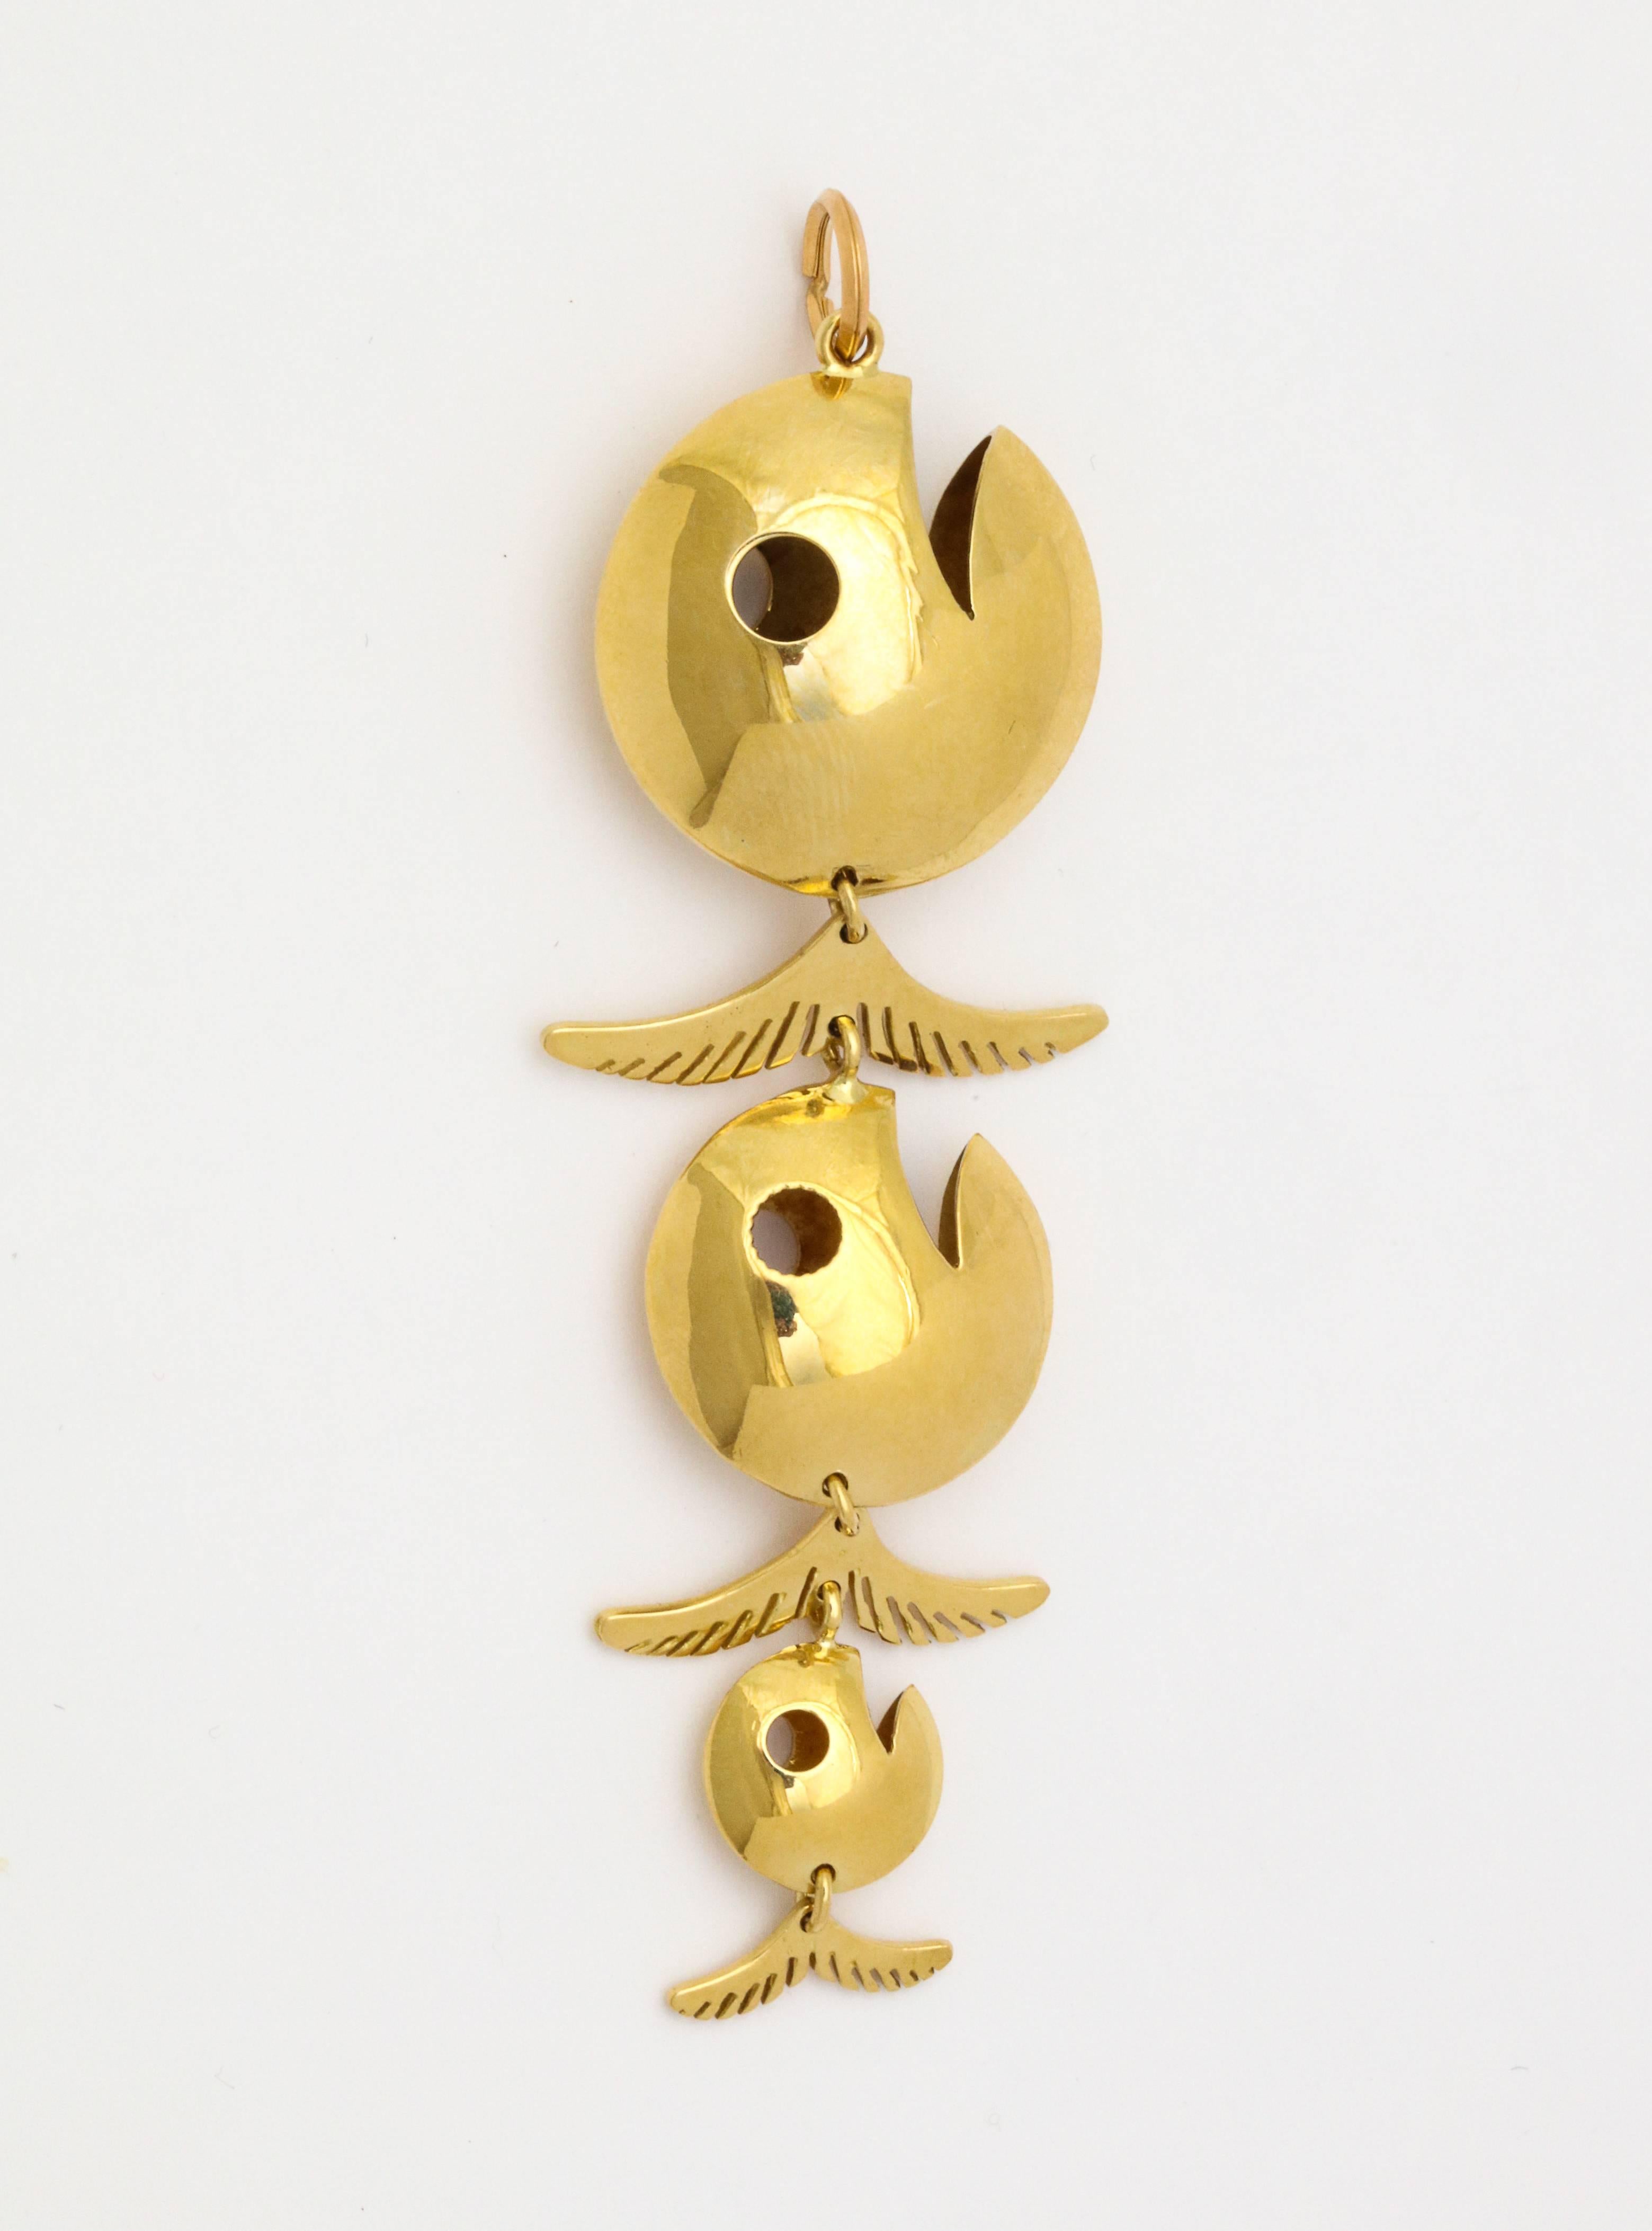 A wonderful series of fish dangle with articulated tails in 18 kt Italian gold.